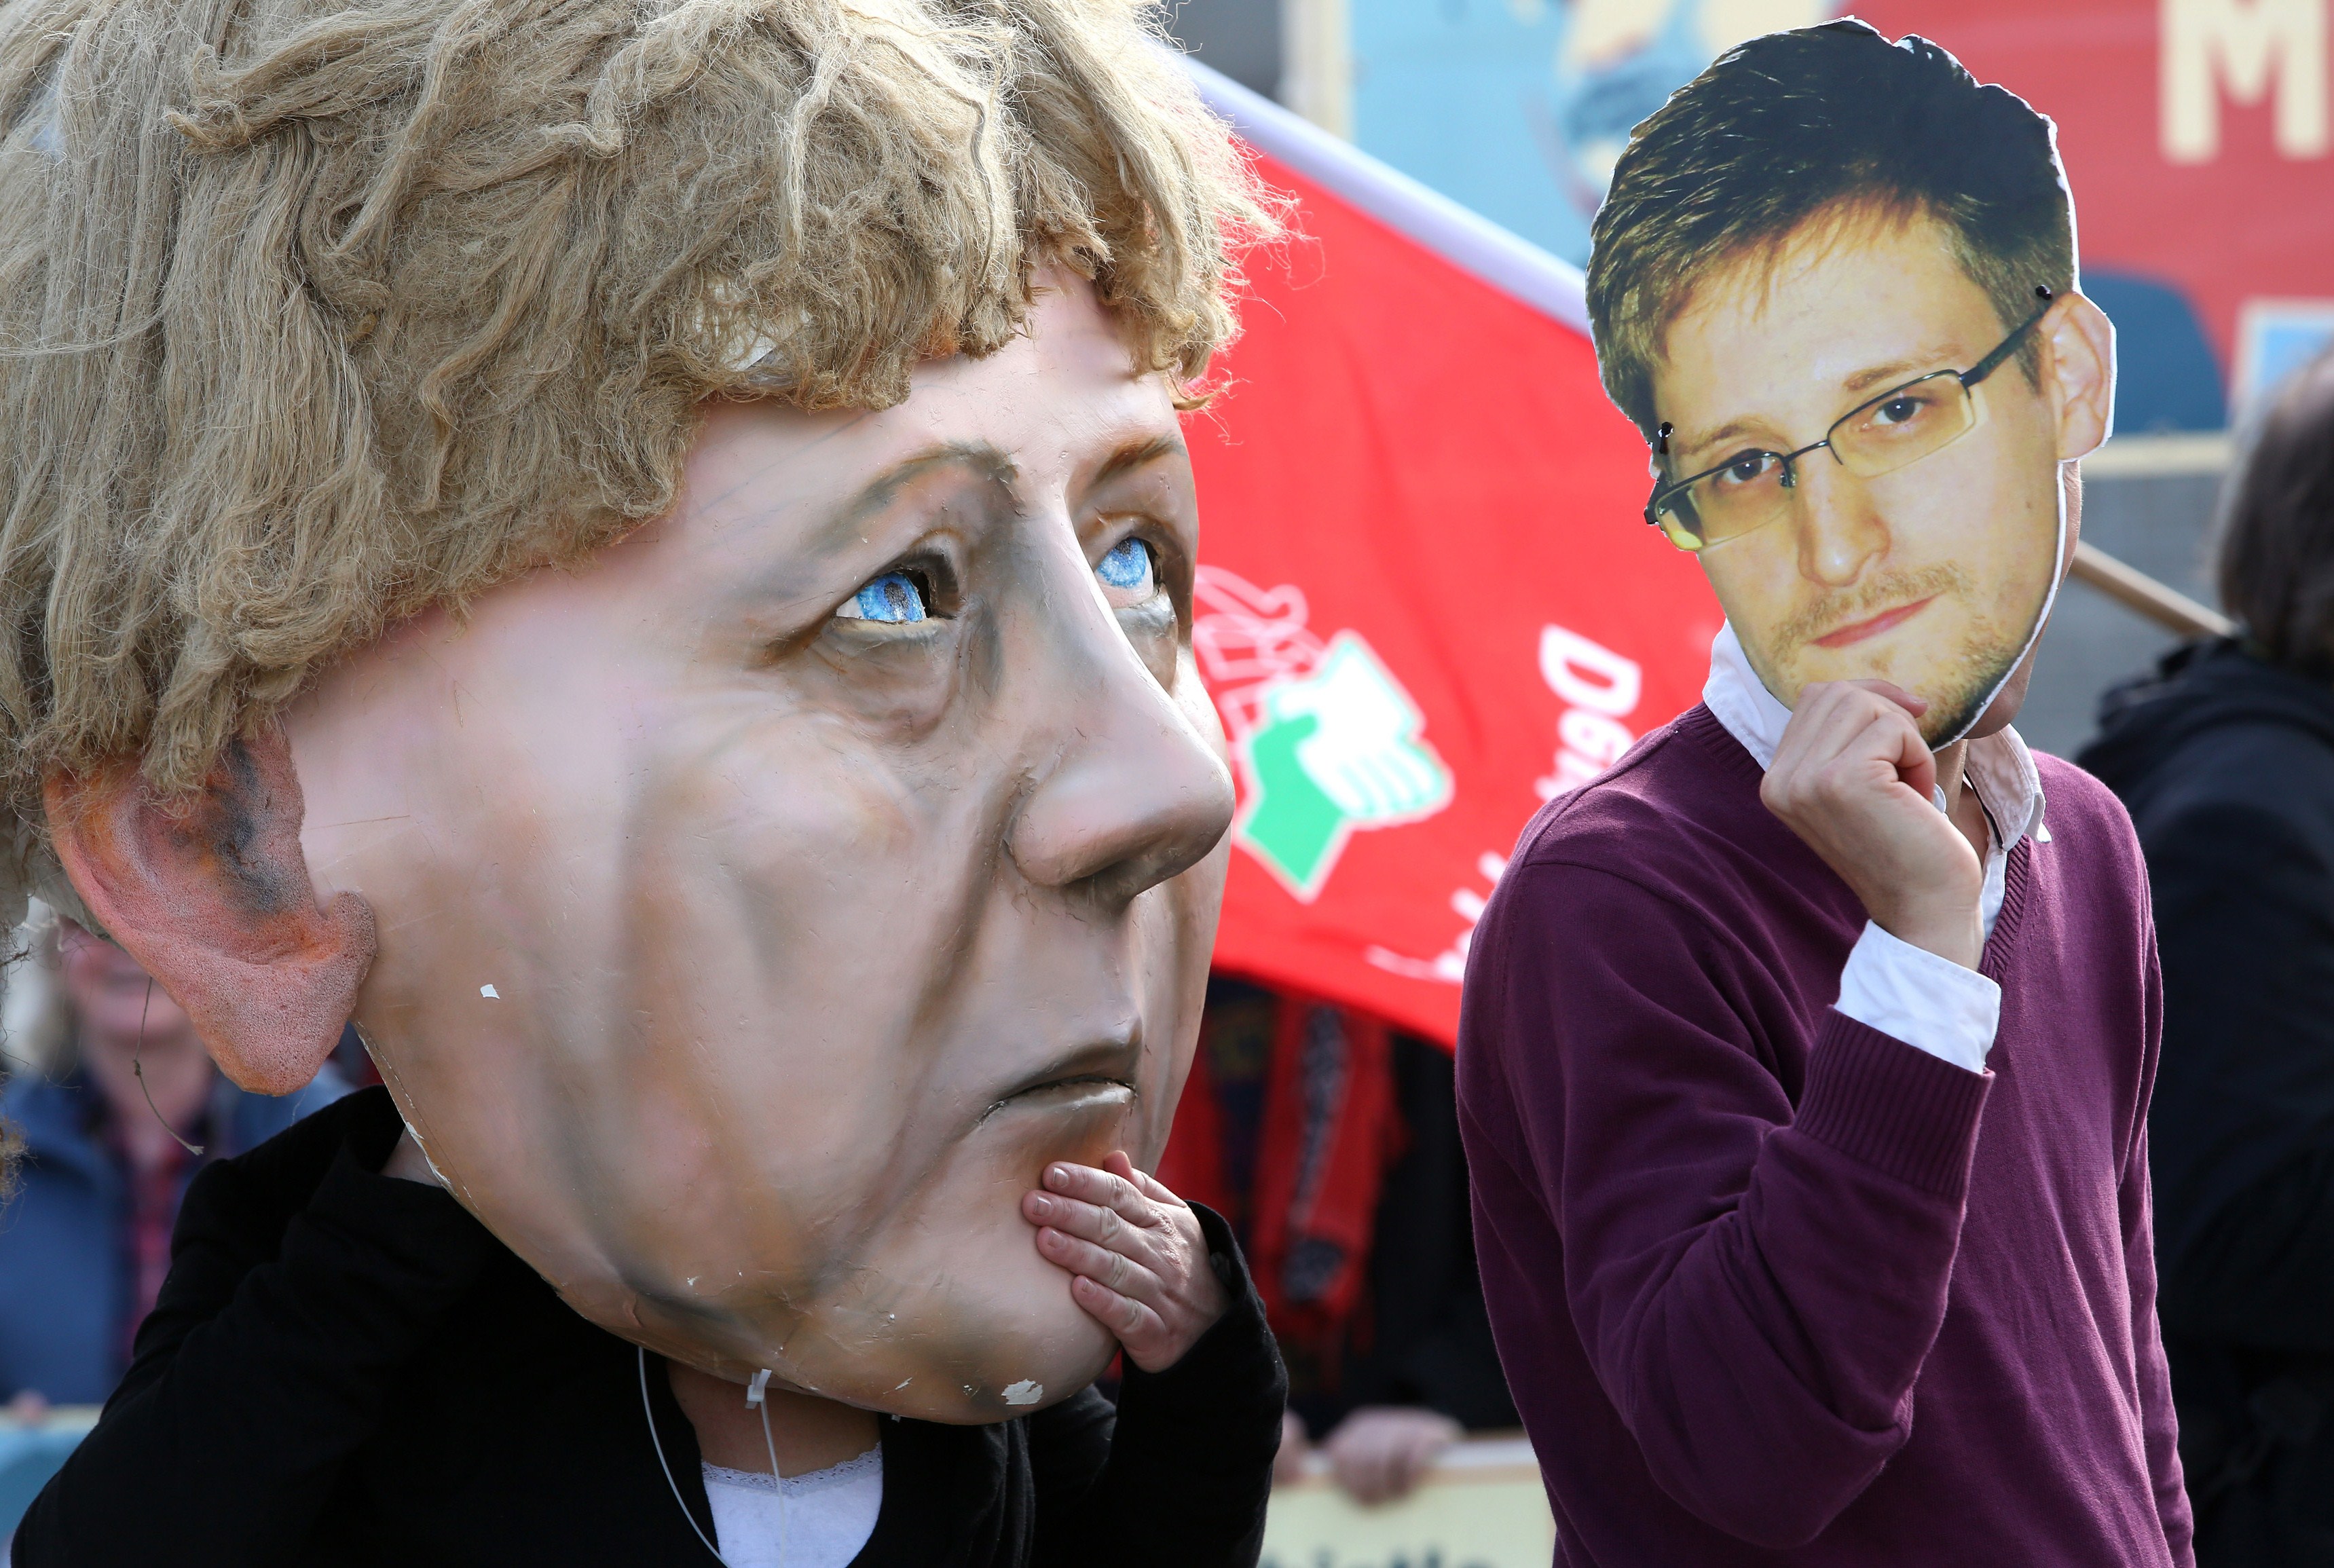 Activists wearing a mask of fugitive U.S. intelligence leaker Edward Snowden (R) and of German Chancellor Angela Merkel take part in a demonstration in favor of an appearance by Snowden as a witness in German NSA hearings held in the German Bundestag, or lower house of parliament, outside the Reichstag building in Berlin on May 8, 2014. (ADAM BERRY&mdash;AFP/Getty Images)